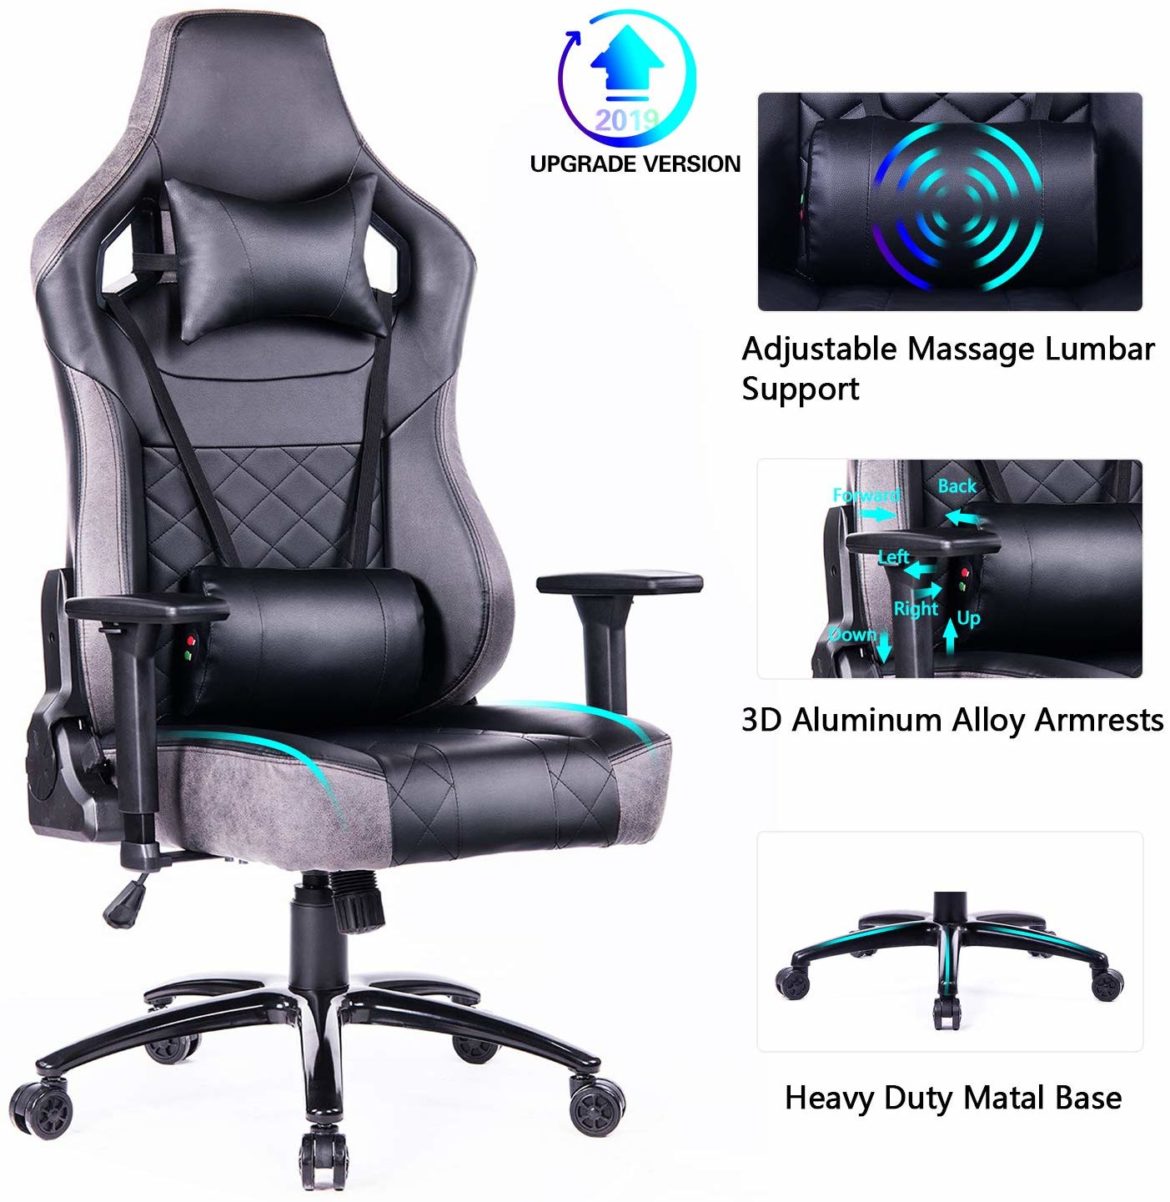 Gaming Chairs - Don't get yourself scammed in 2022!